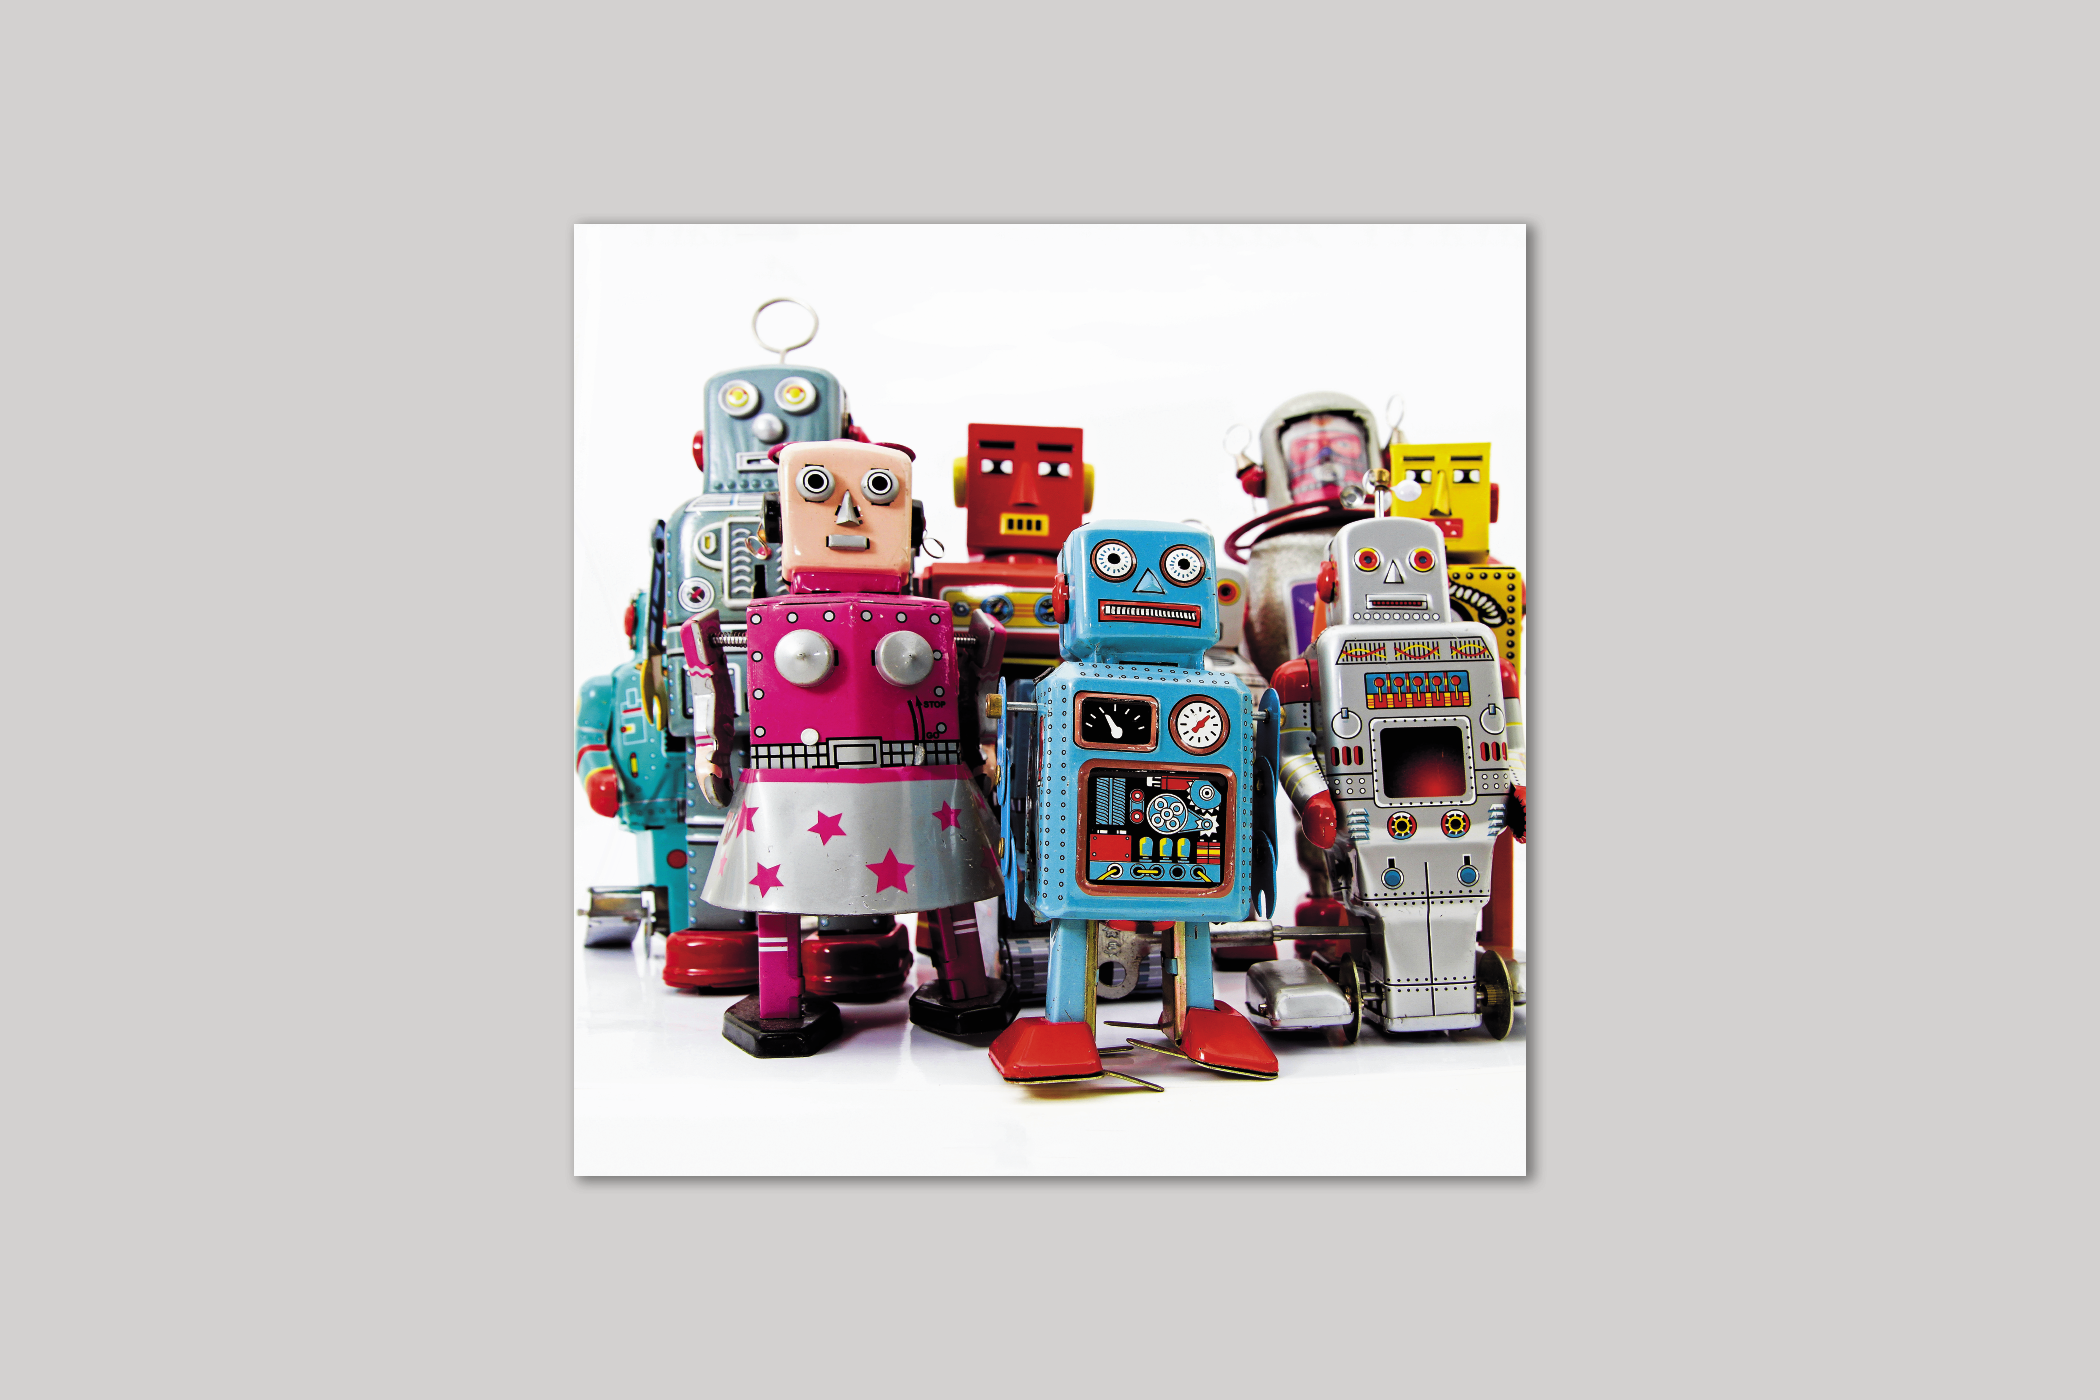 Retro Robots from Exposure range of photographic cards by Icon.